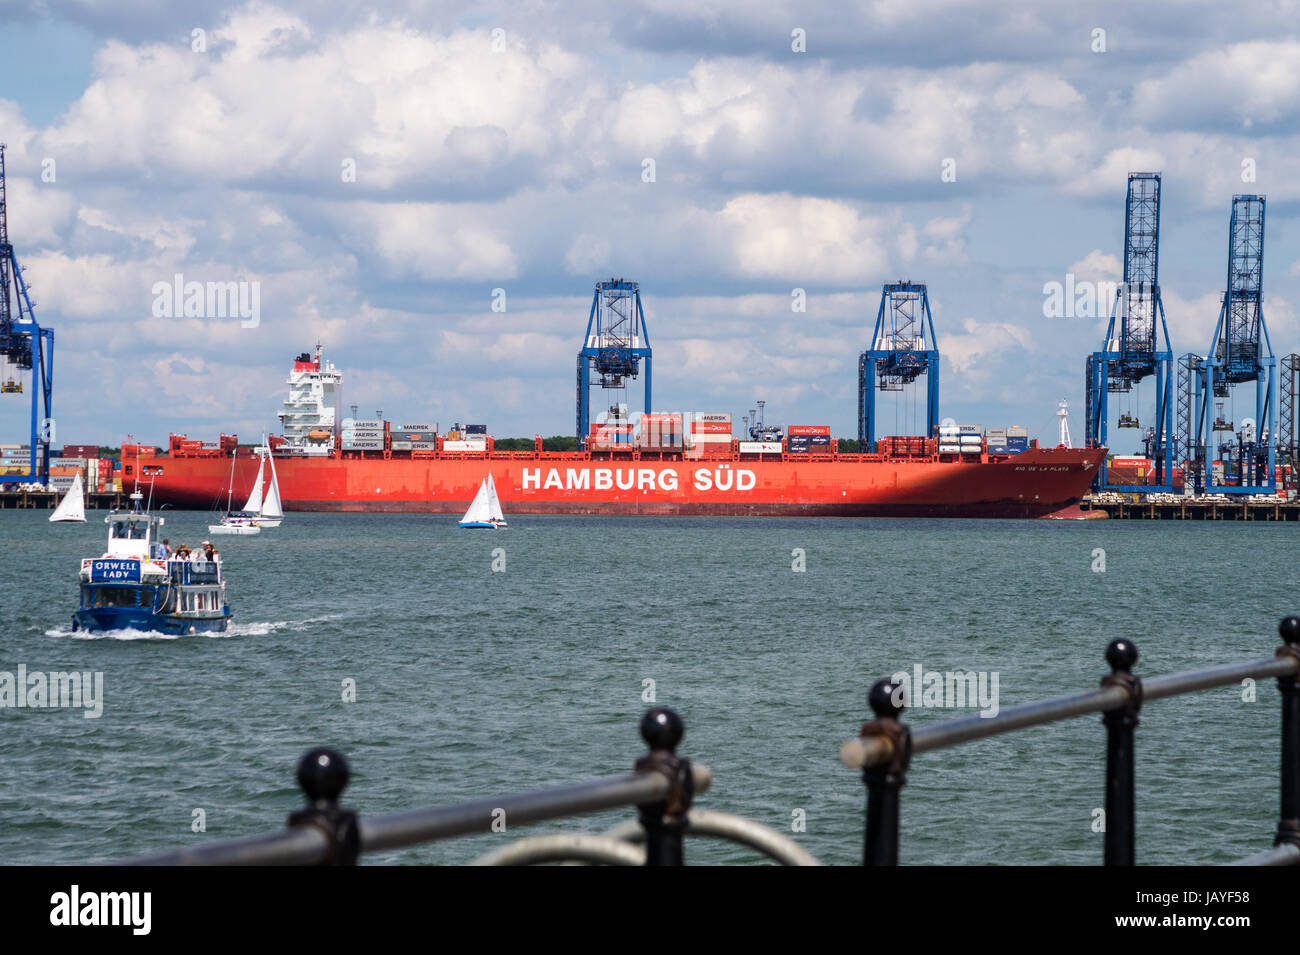 'Orwell Lady' sightseeing cruise boat, and Felixstowe container port, seen from Harwich Essex. Behind, Hamburg Sud container ship 'Rio de la Plata'. Stock Photo